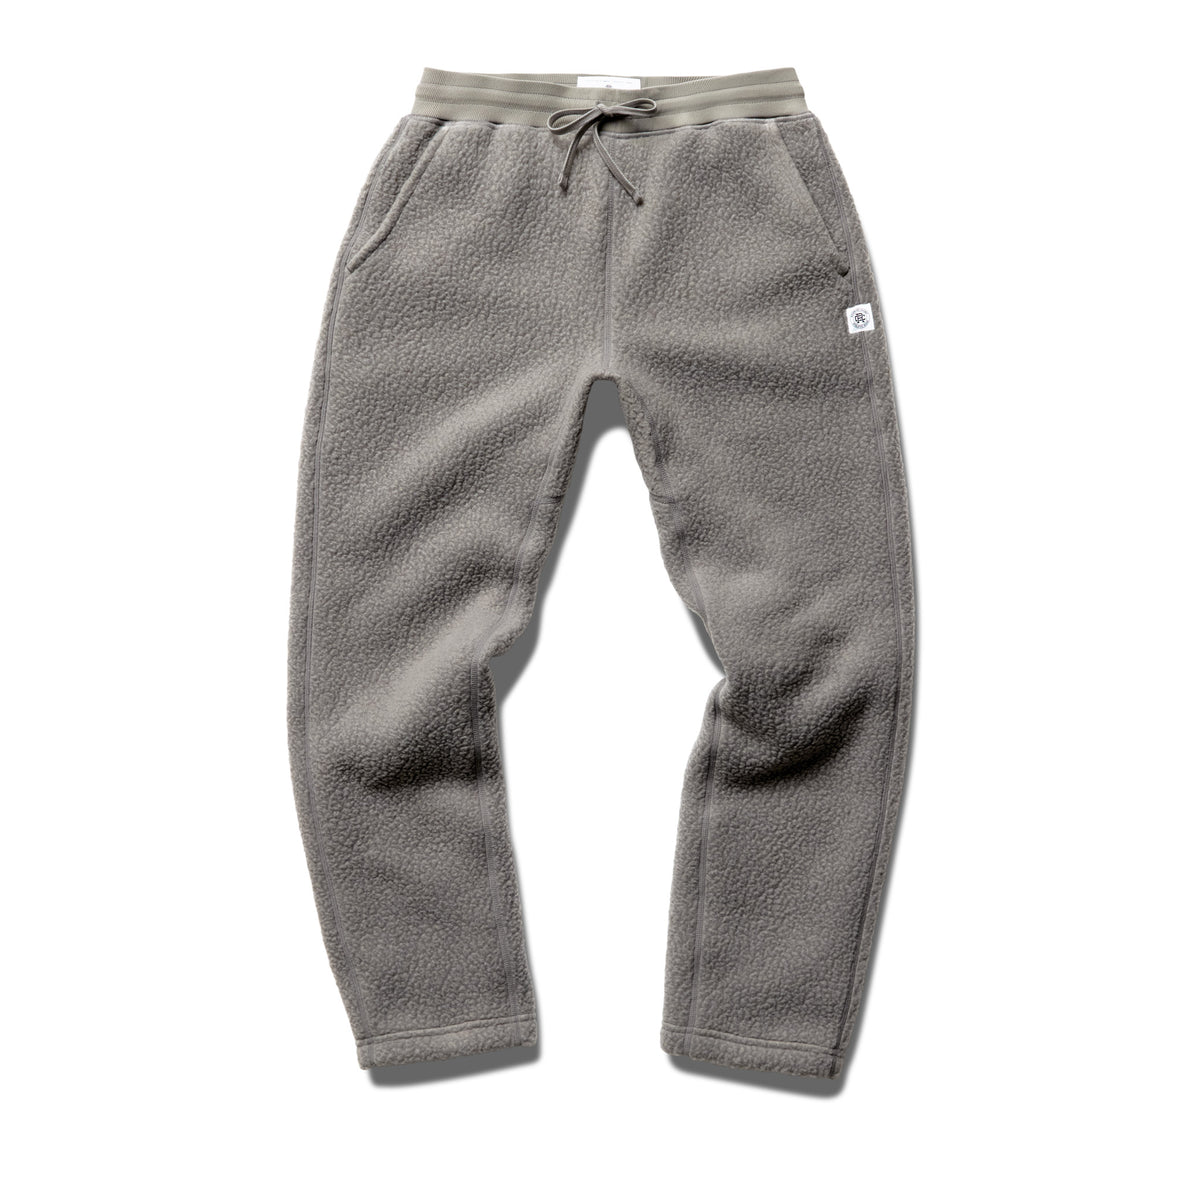 Polartec Thermal Pro Jogger | Reigning Champ